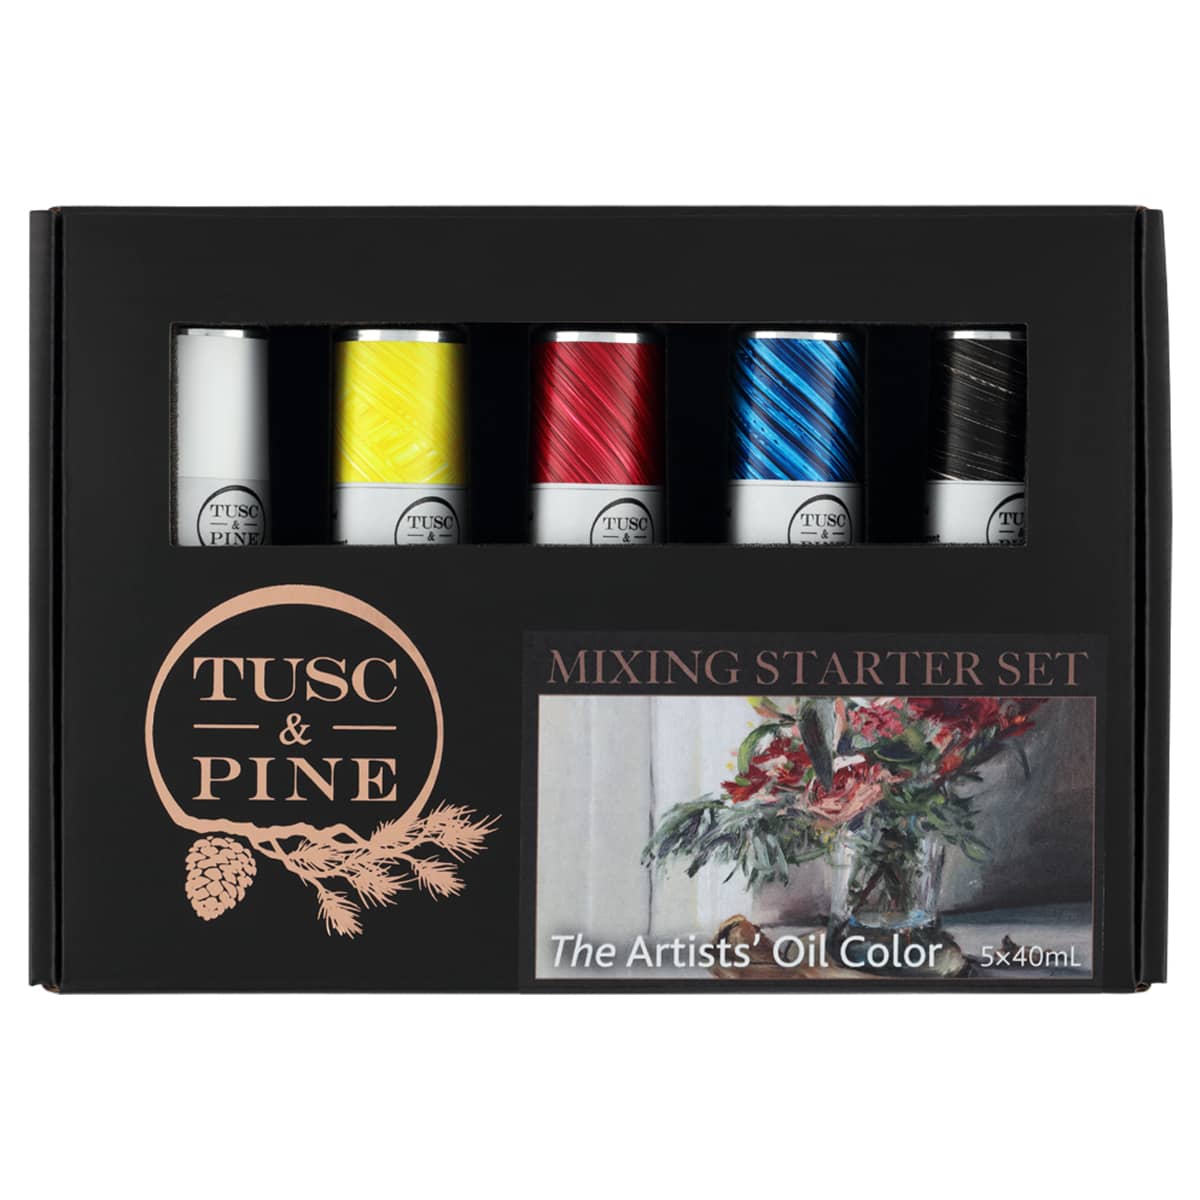 Tusc & Pine Oil Color Mixing Colors Starter Set of 5, 40ml Tubes